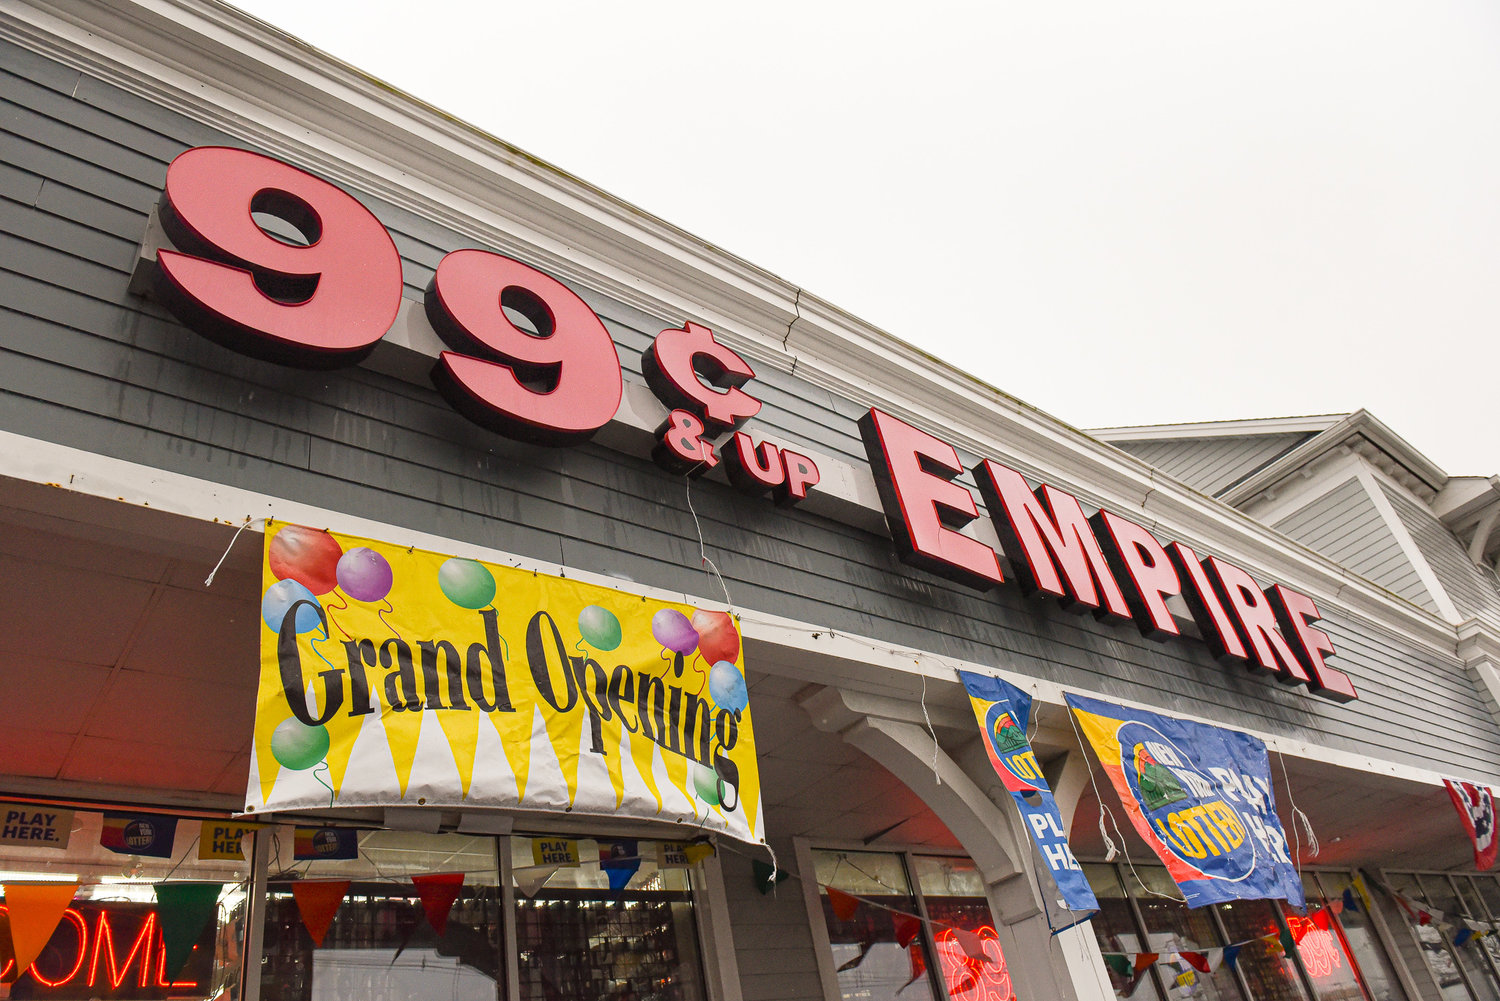 99¢ & Up Empire has reopened -- 8 months after a speeding car crashed into the wall that divided it from the Subway next door.